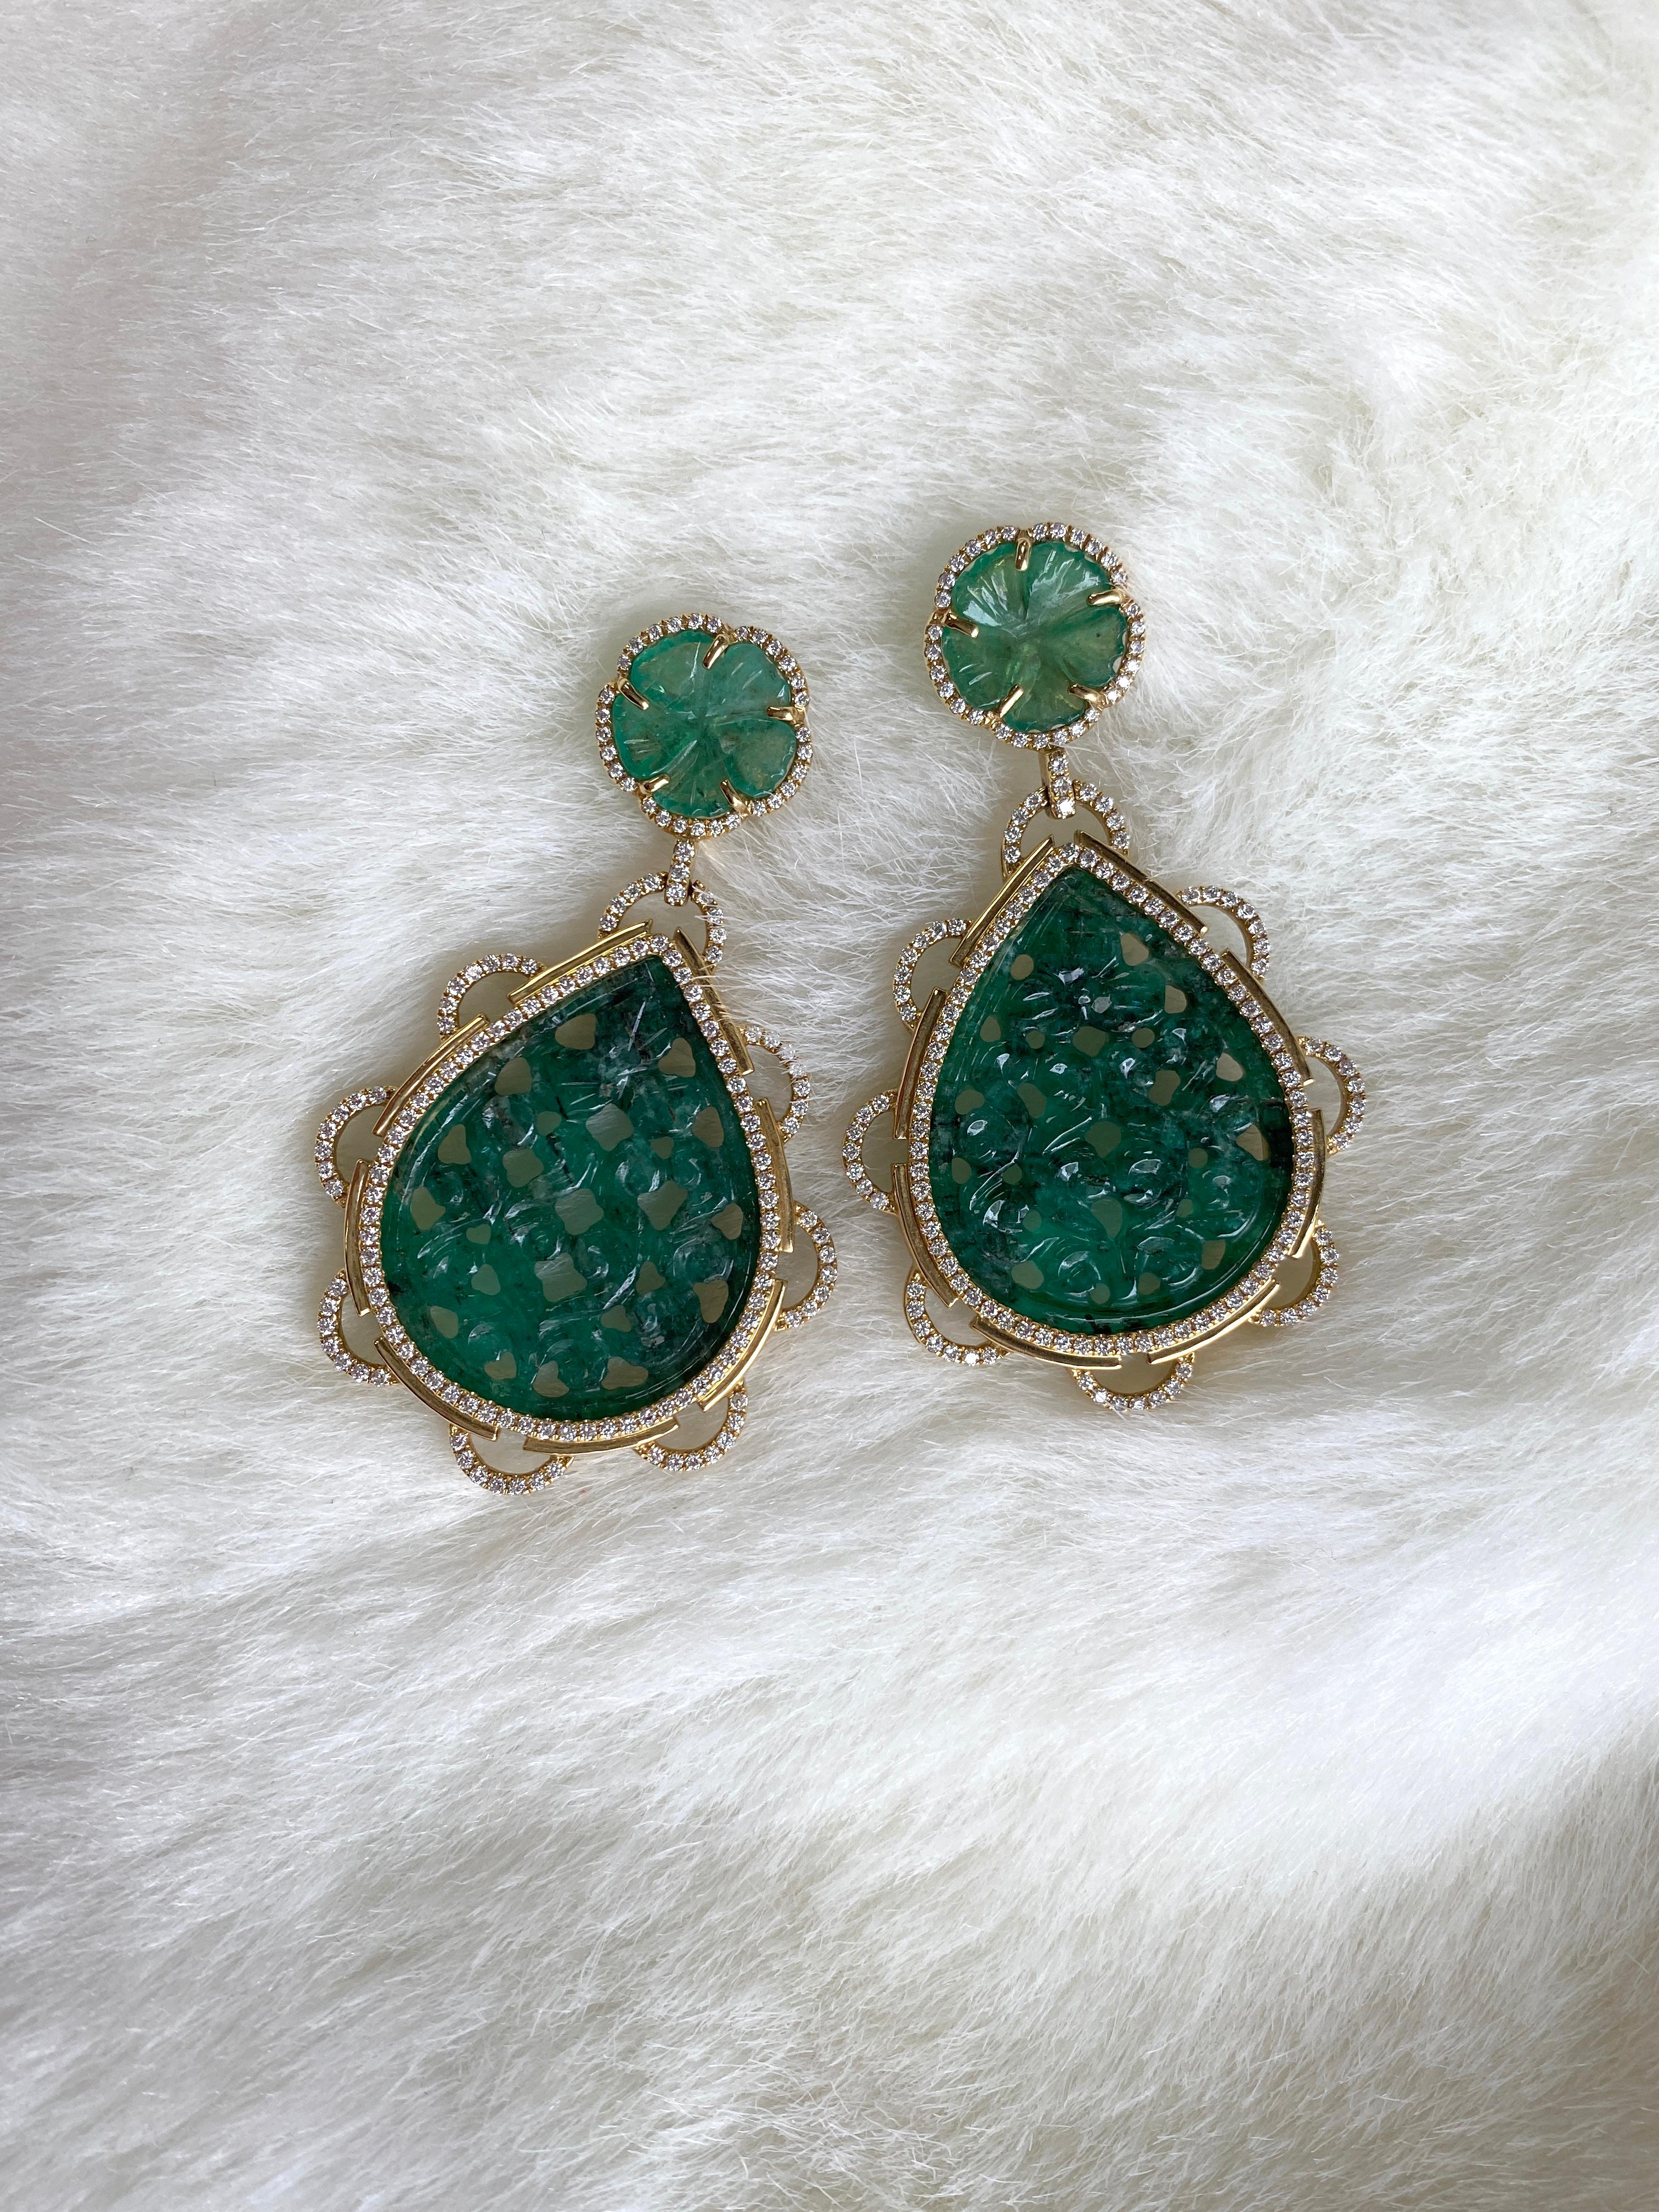 Contemporary Goshwara Emerald Carved with Carved Flower and Diamond Earrings For Sale